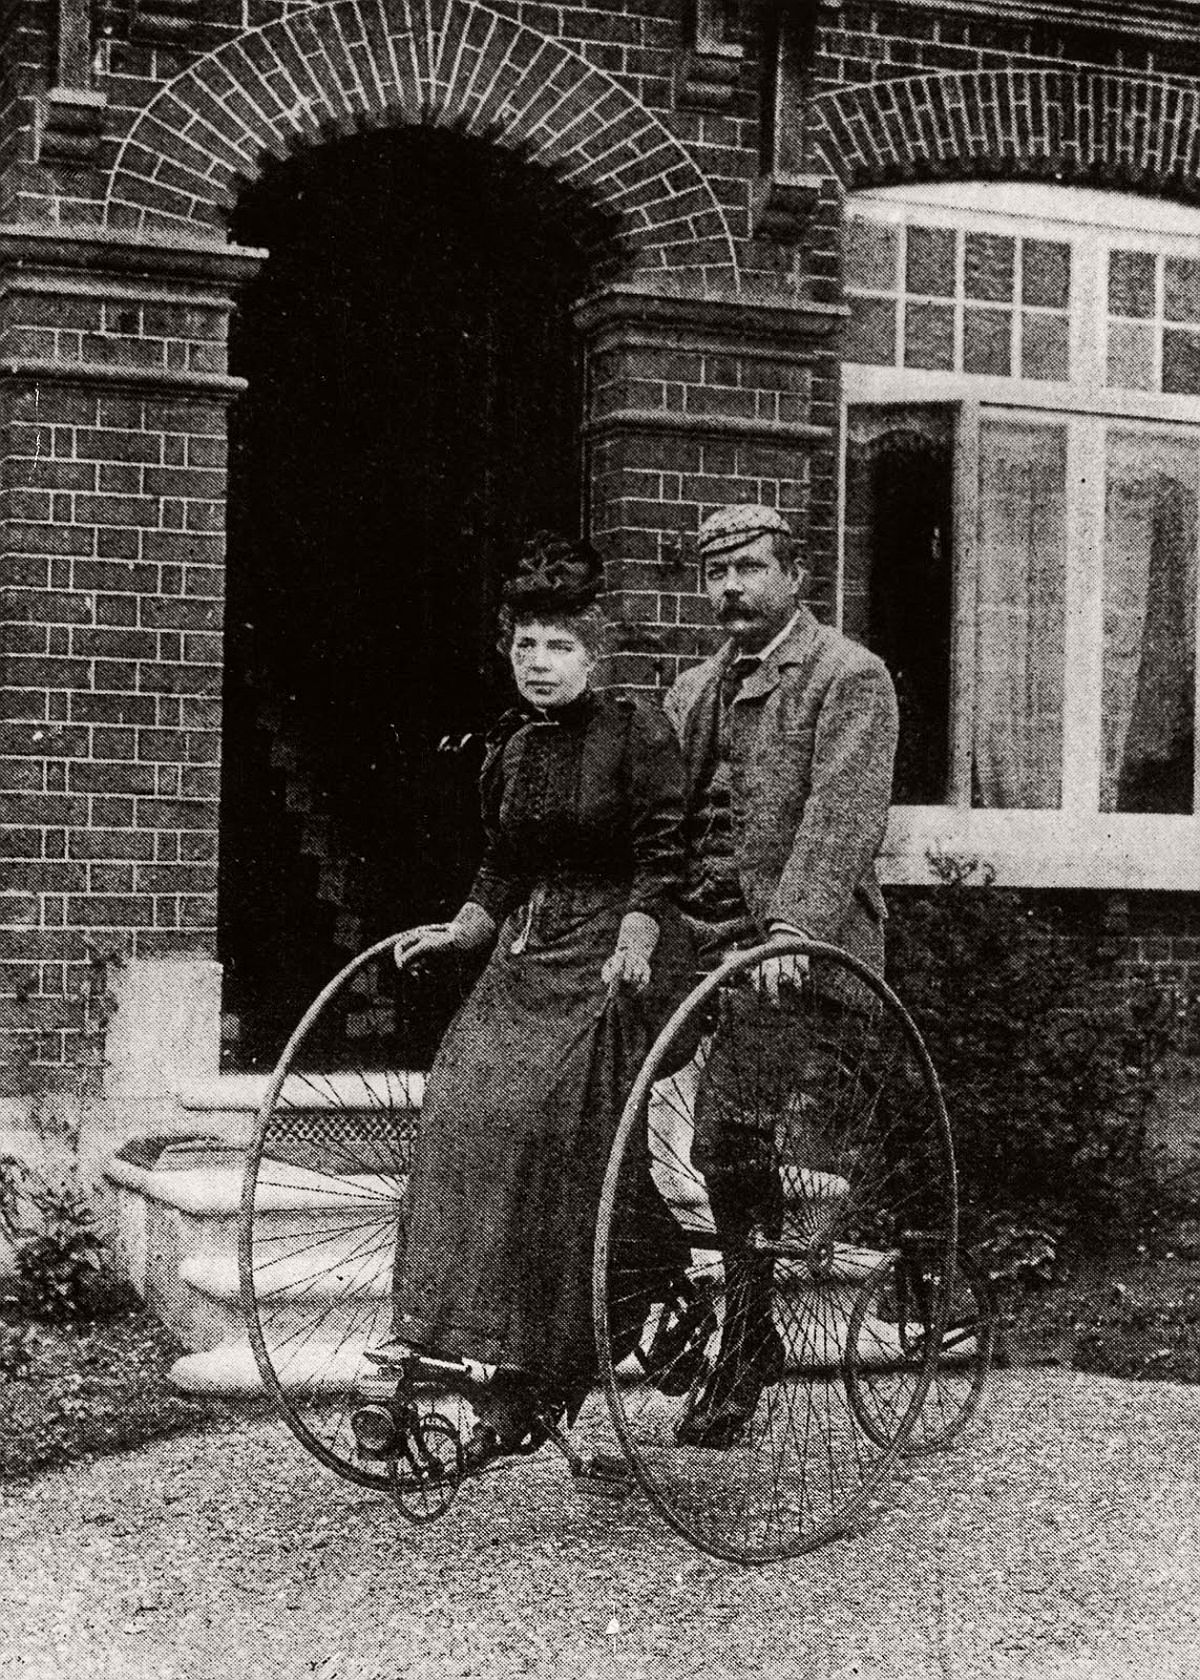 Sir Arthur Conan Doyle and his wife ride a tandem tricycle, 1895. (Getty Images)